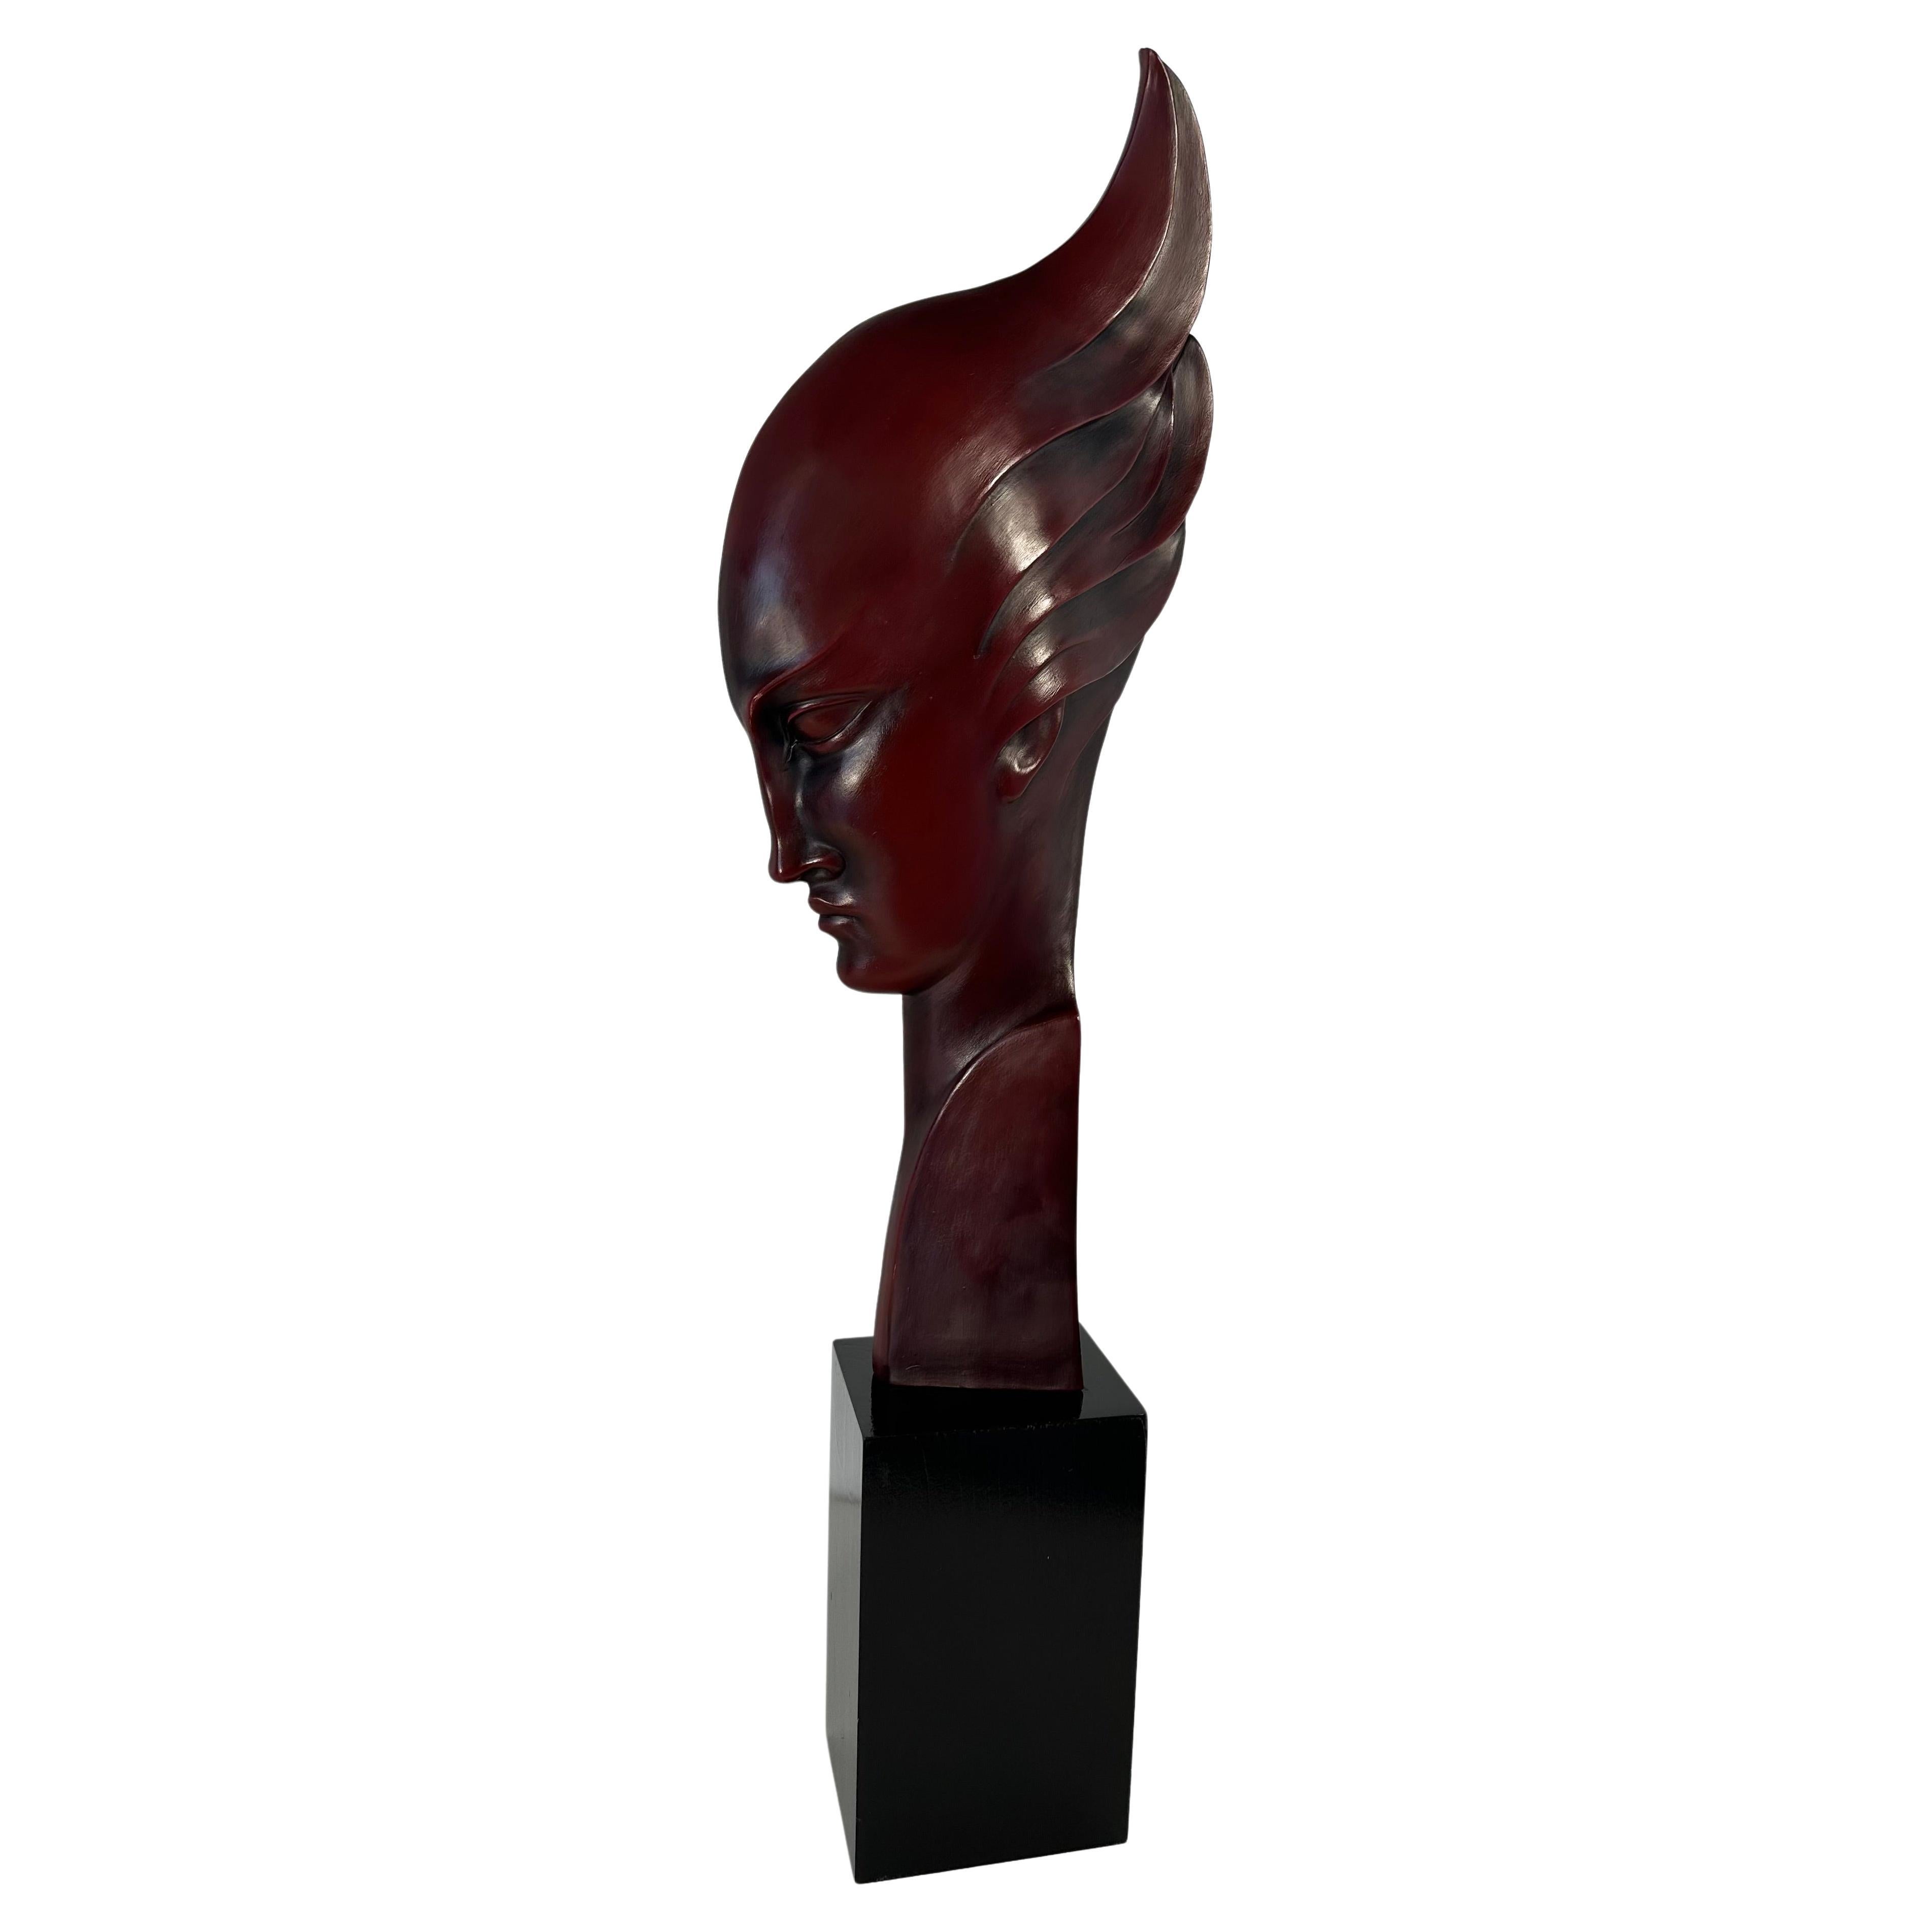 G. Cacciapuoti Art Deco Red Porcelain Stoneware and Wood Woman Profile, 1930s For Sale